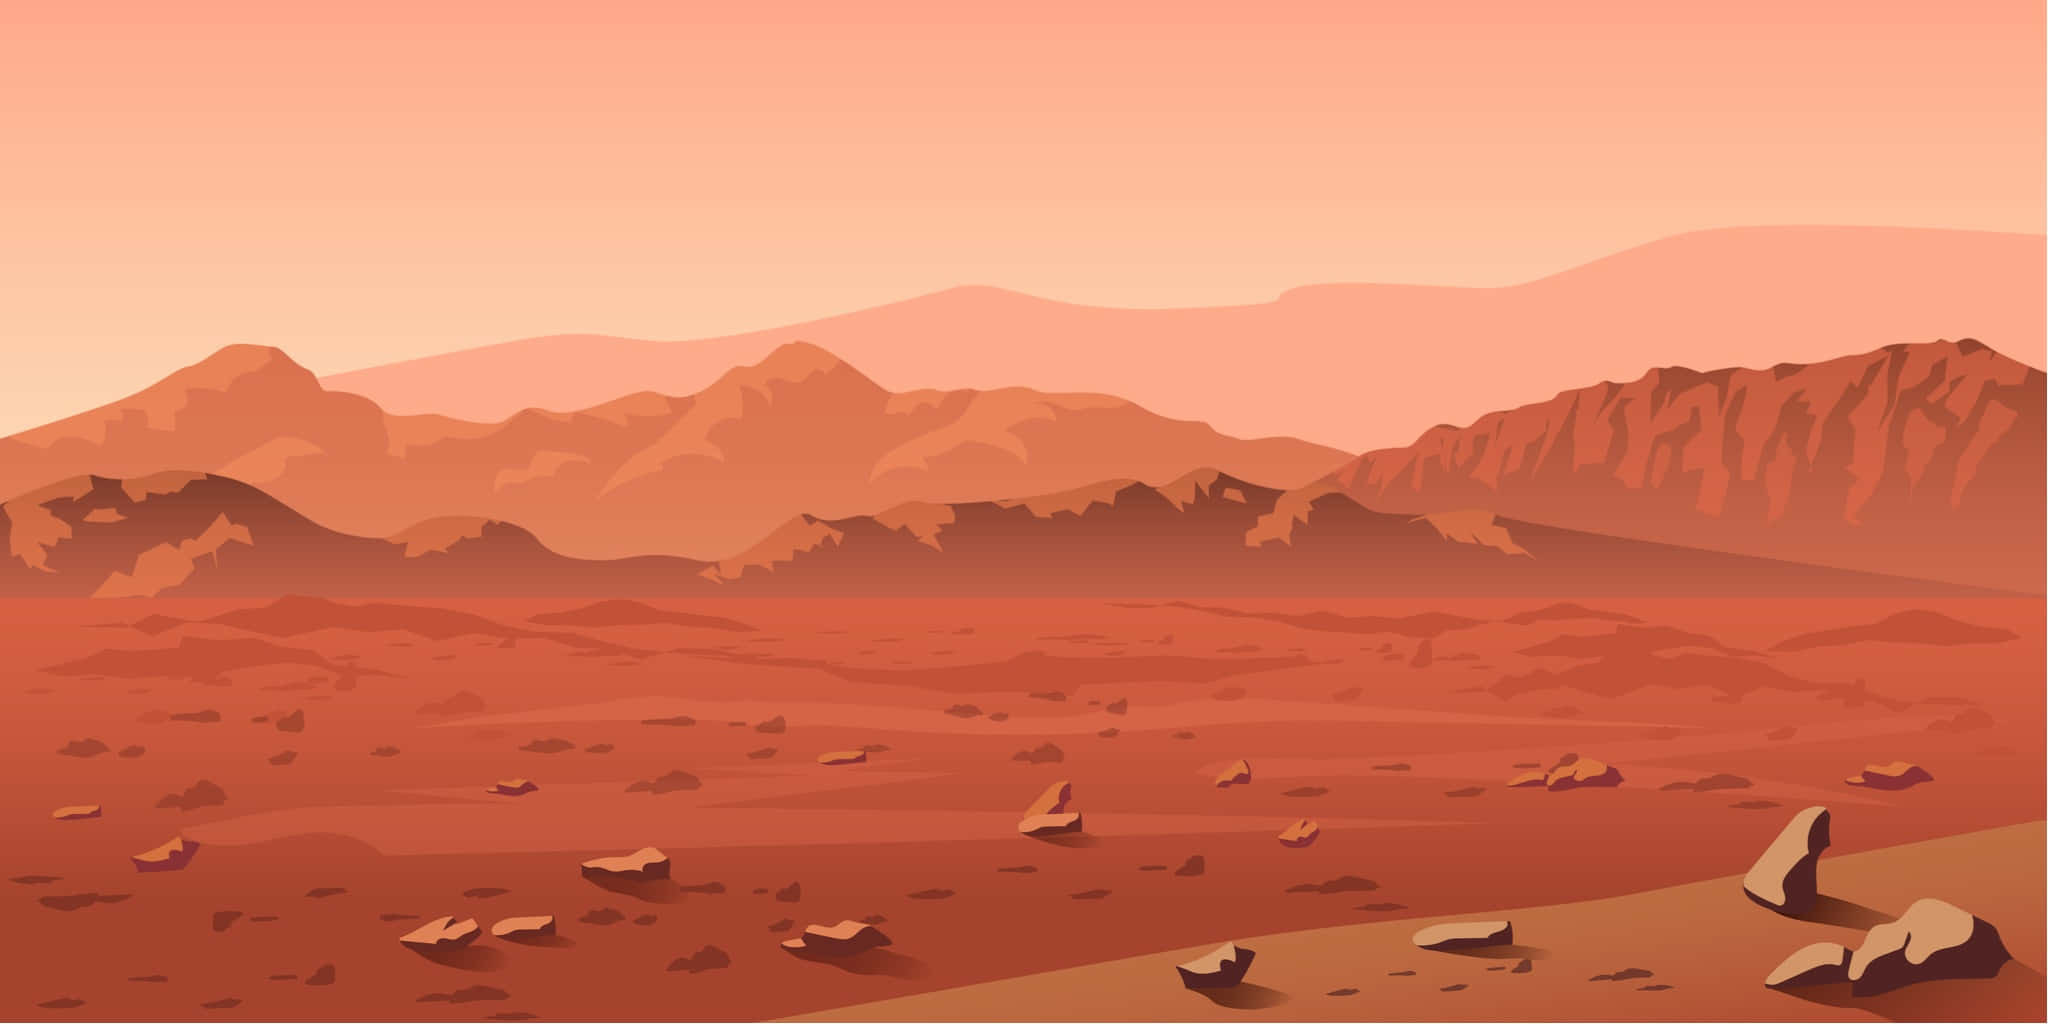 Welcome to the Red Planet - Mars